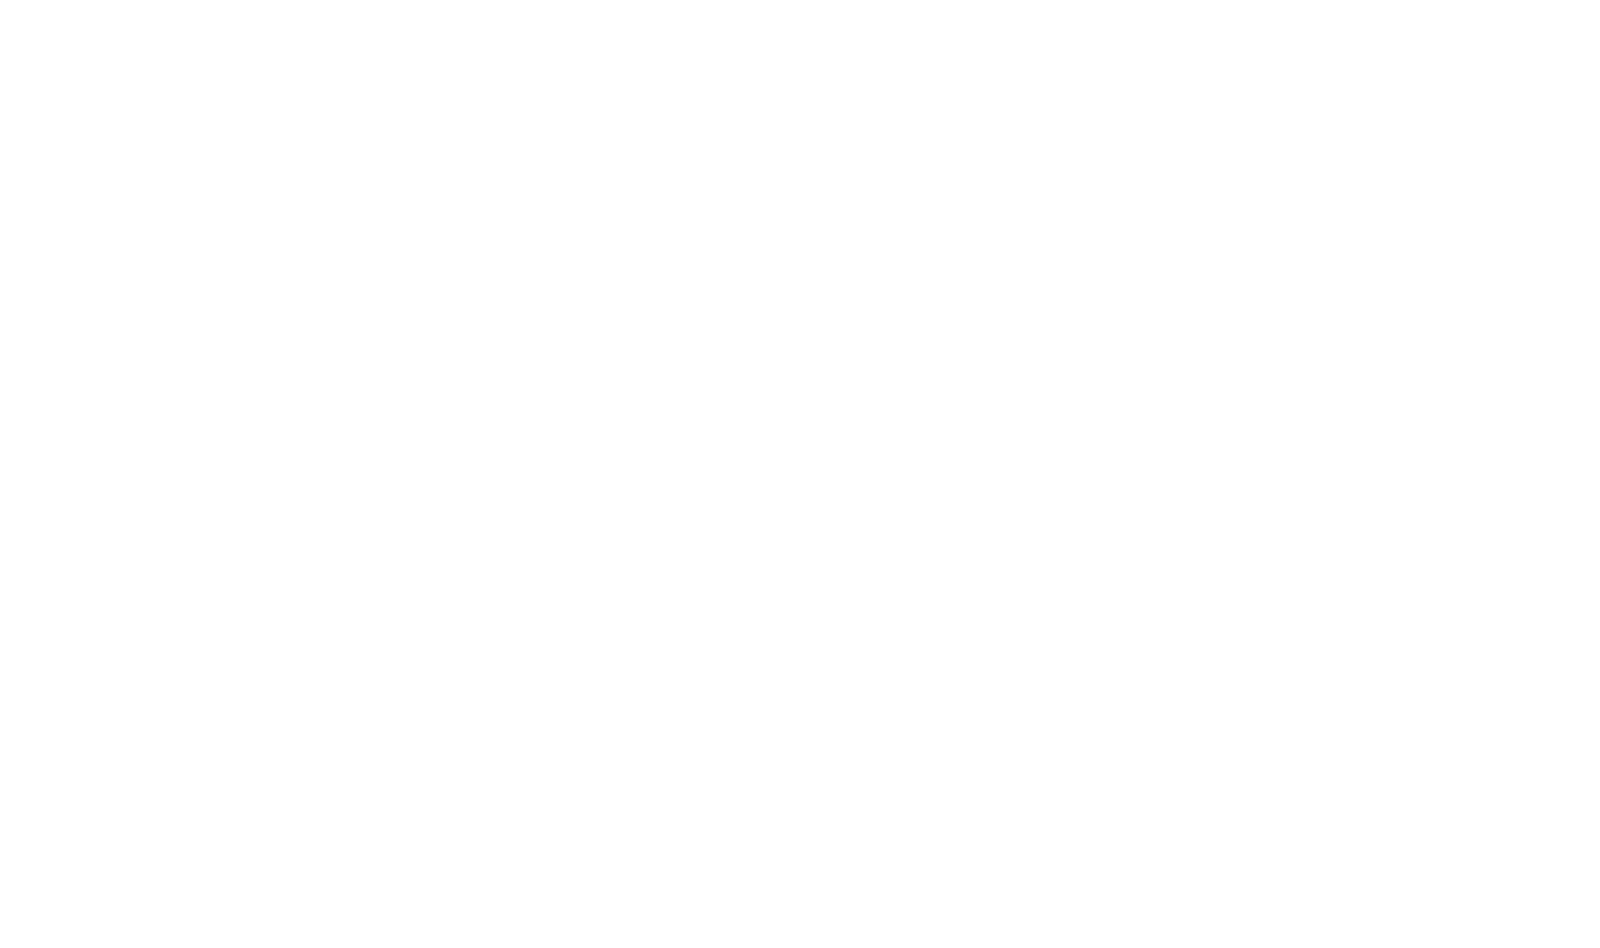 A graphic of a bike set to a low opacity behind text that describes how leadout communications can help small businesses and non-profits thrife.